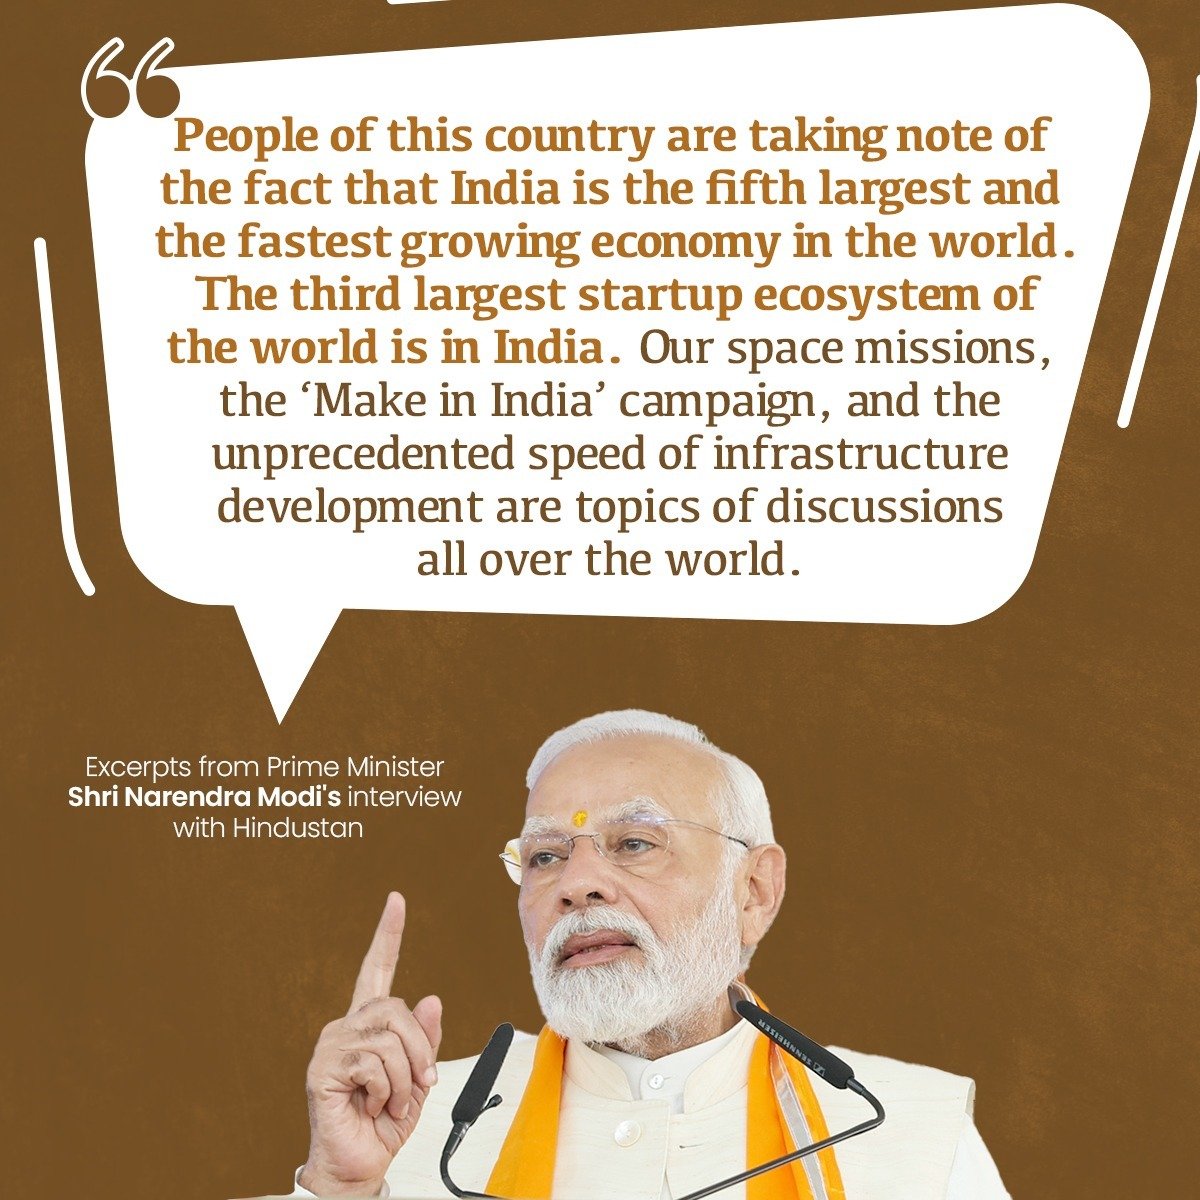 Global conversations are buzzing with admiration for India's space missions, the 'Make in India' campaign, and the remarkable pace of infrastructure development under PM Modi Ji's leadership. 
#MakeInIndia #SpaceMission #Infrastructure #ModiKiGuarantee #ModiHaiTohMumkinHai